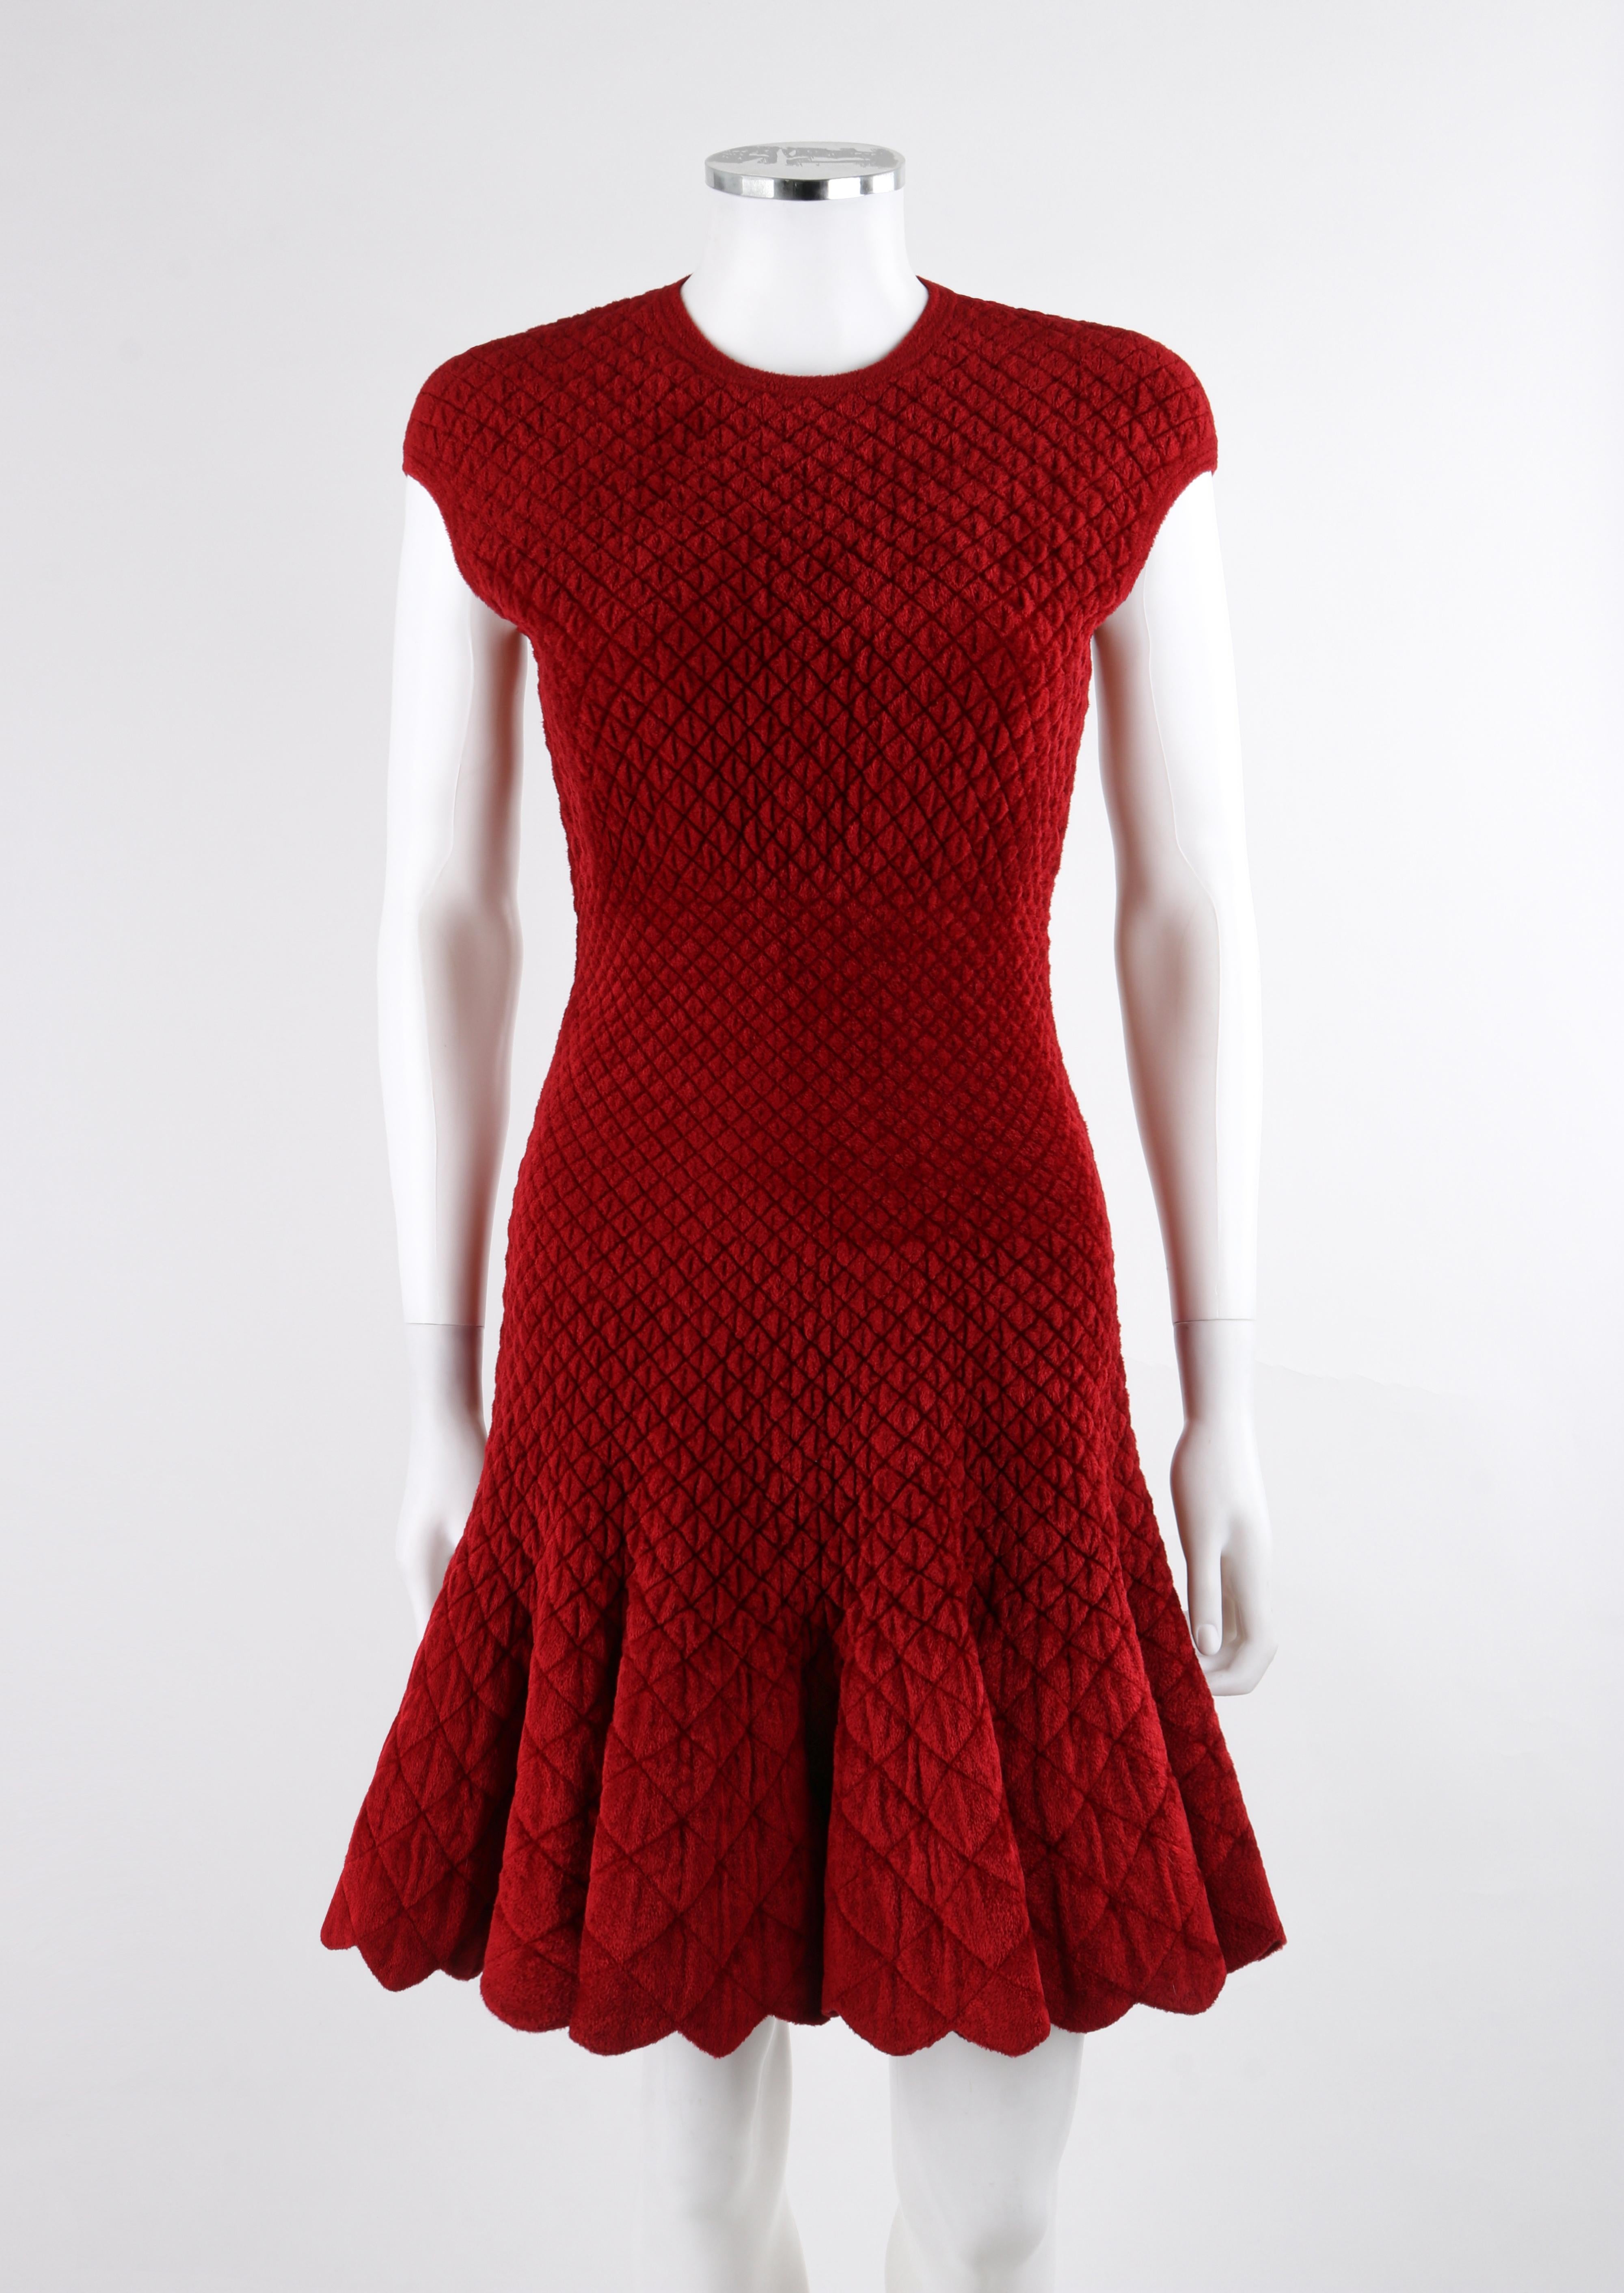 ALEXANDER McQUEEN c.2010's Red Wool Quilted Plush Sleeveless Fit & Flair Dress

Brand / Manufacturer: Alexander McQueen
Circa: 2010's
Designer: Sarah Burton
Style: Sleeveless dress
Color(s): Red
Lined: No
Marked Fabric: 